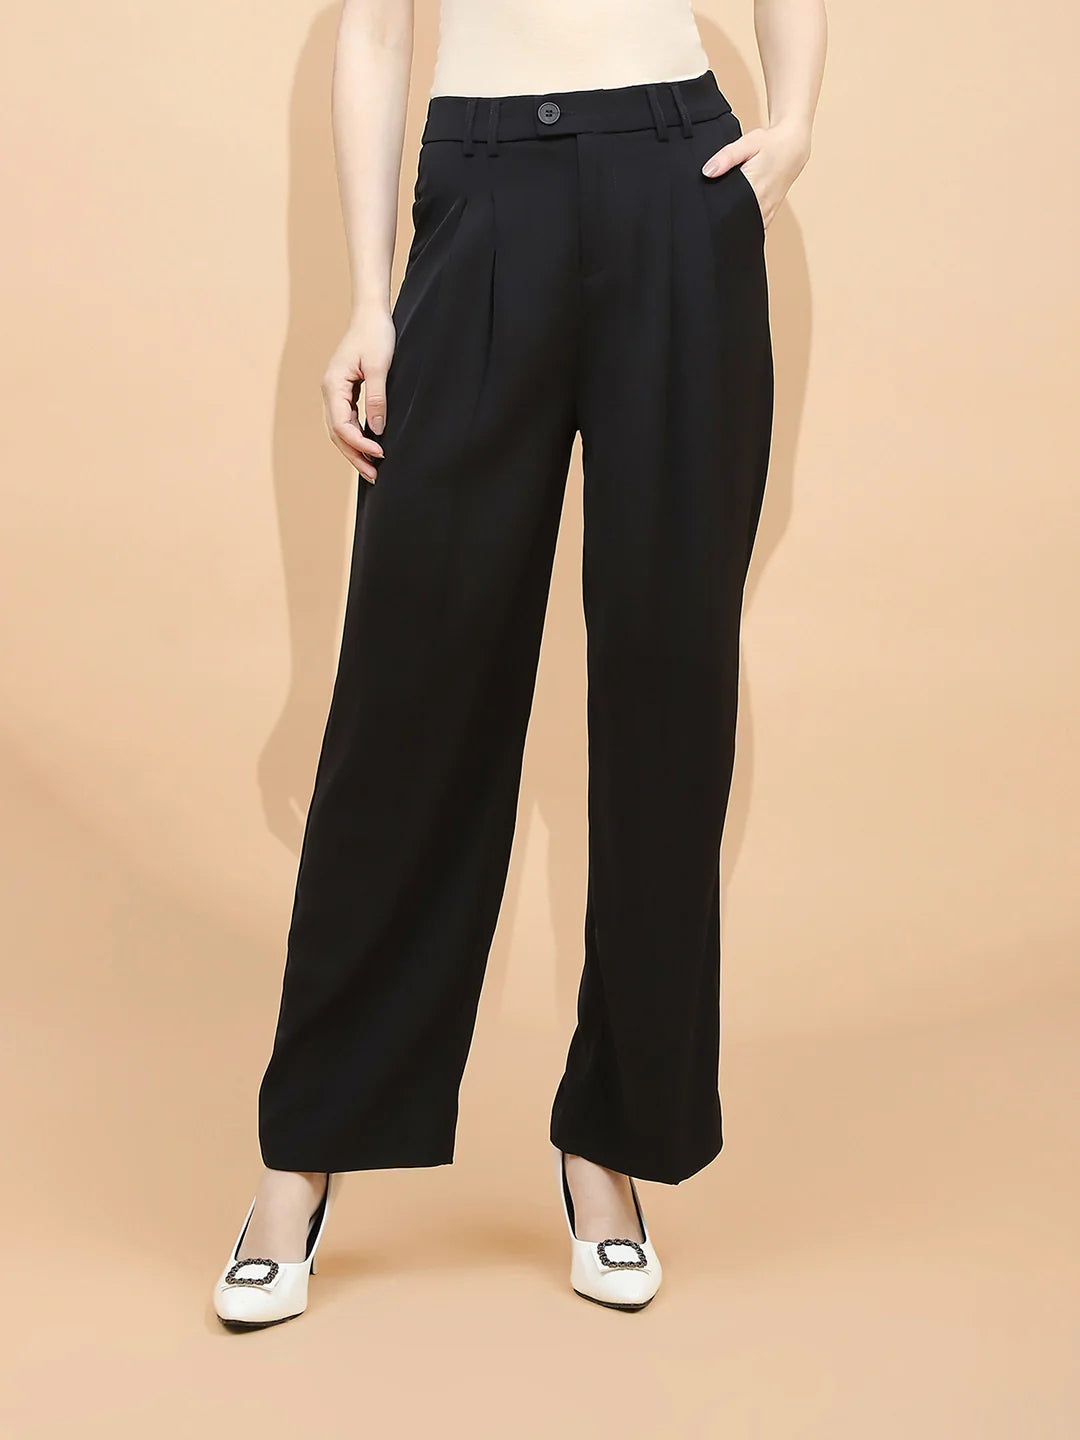 Black Polyester Blend Loose Fit Trouser For Women - Global Republic #